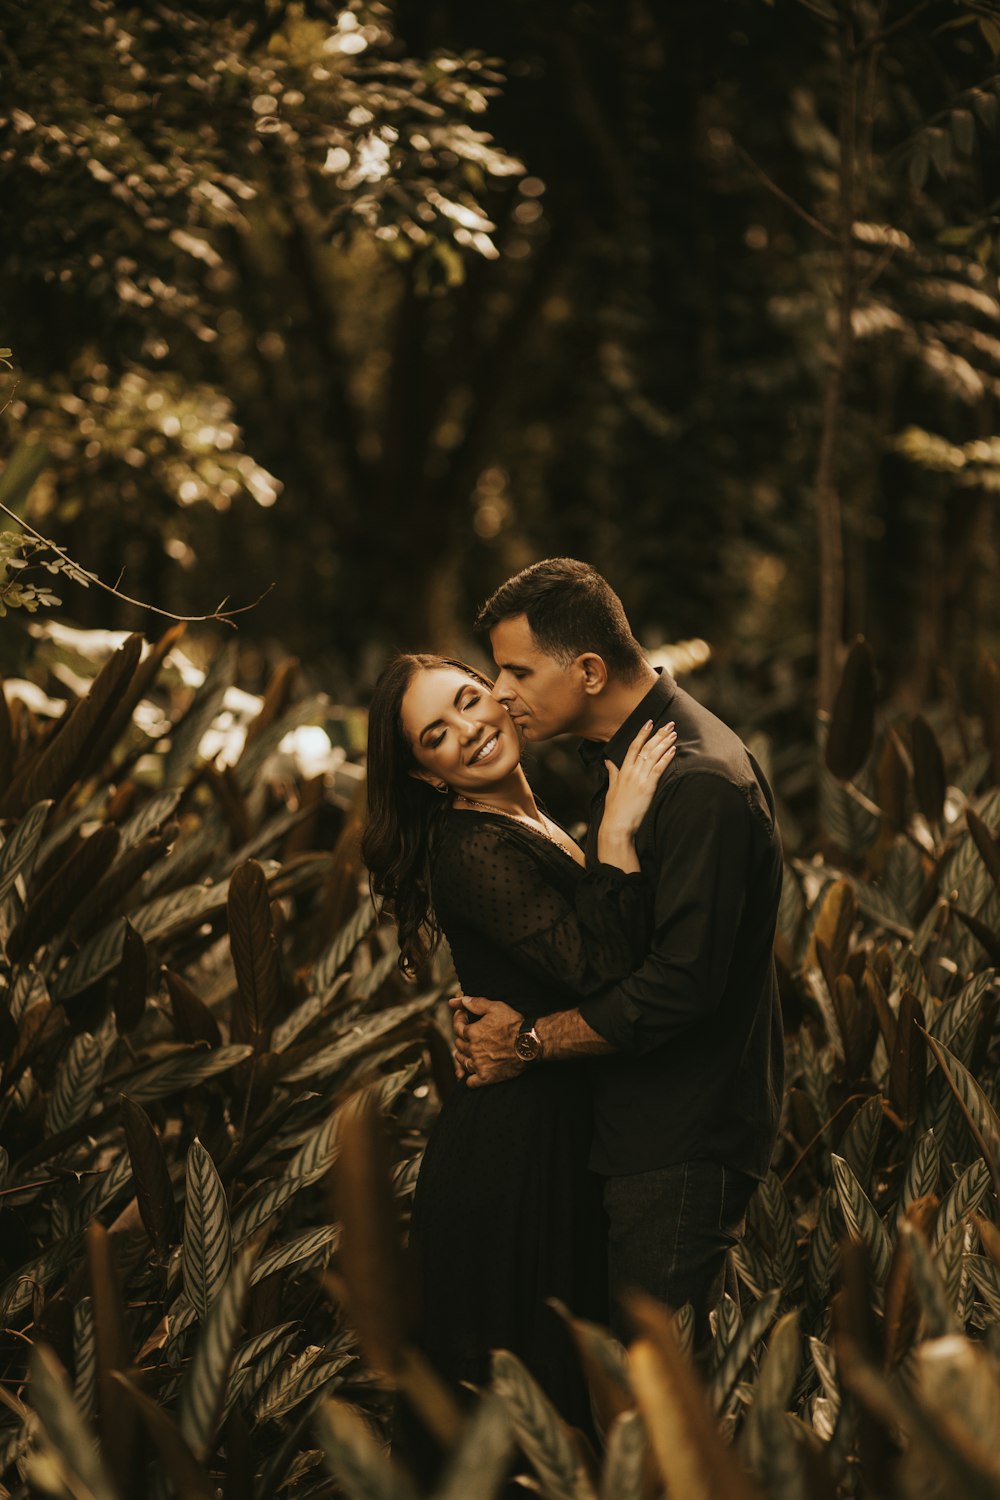 a man and a woman embracing in a field of plants